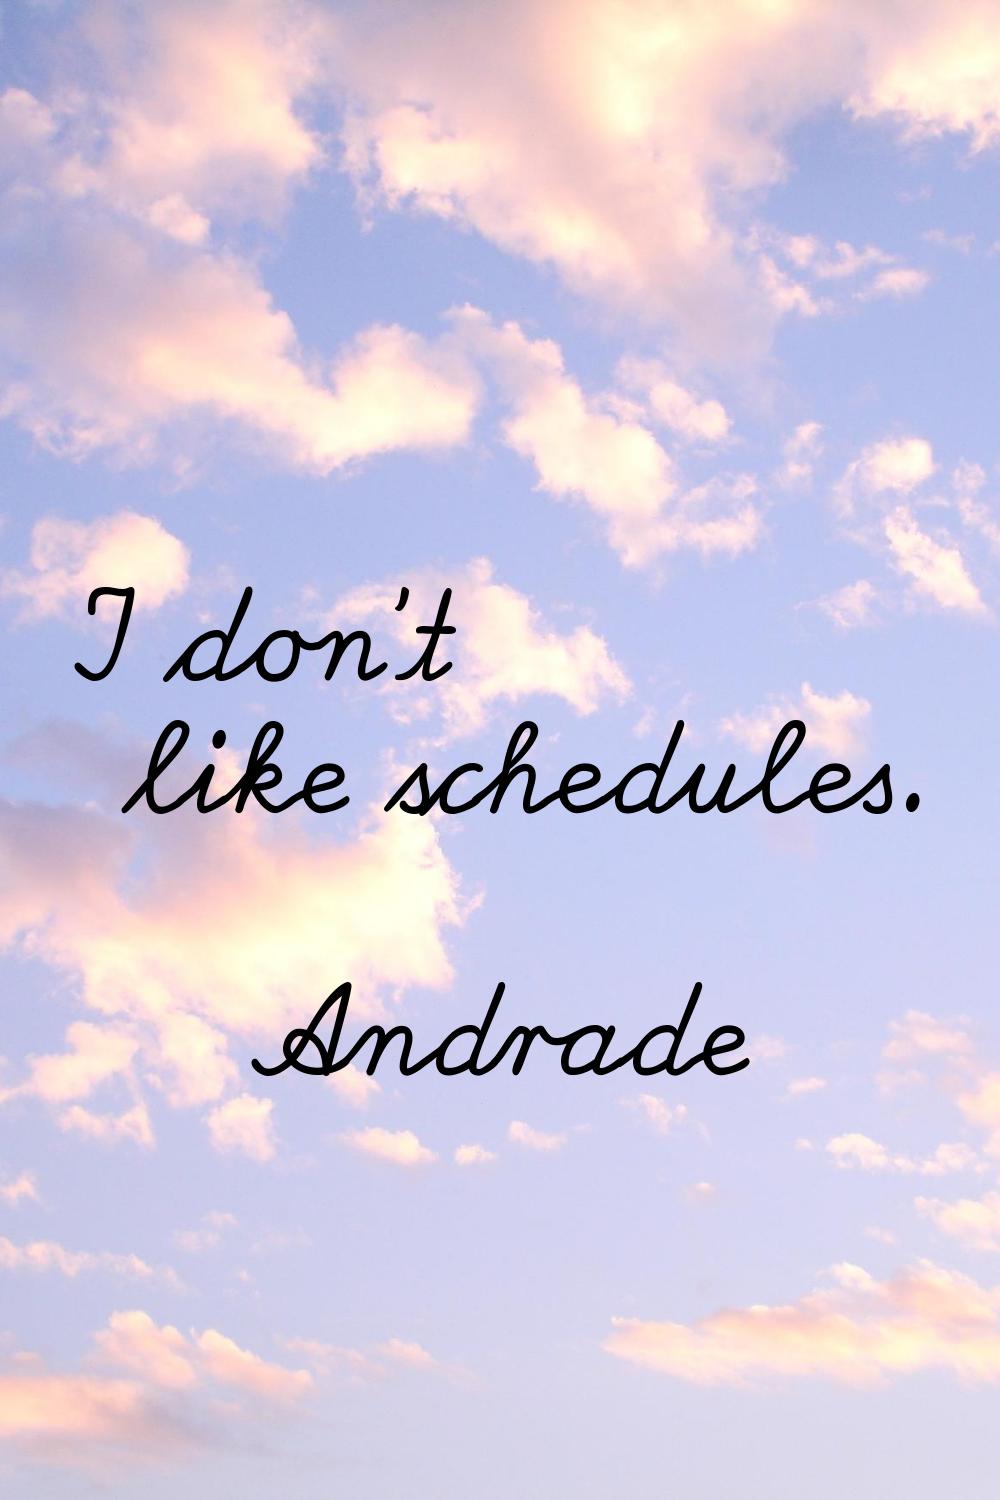 I don't like schedules.